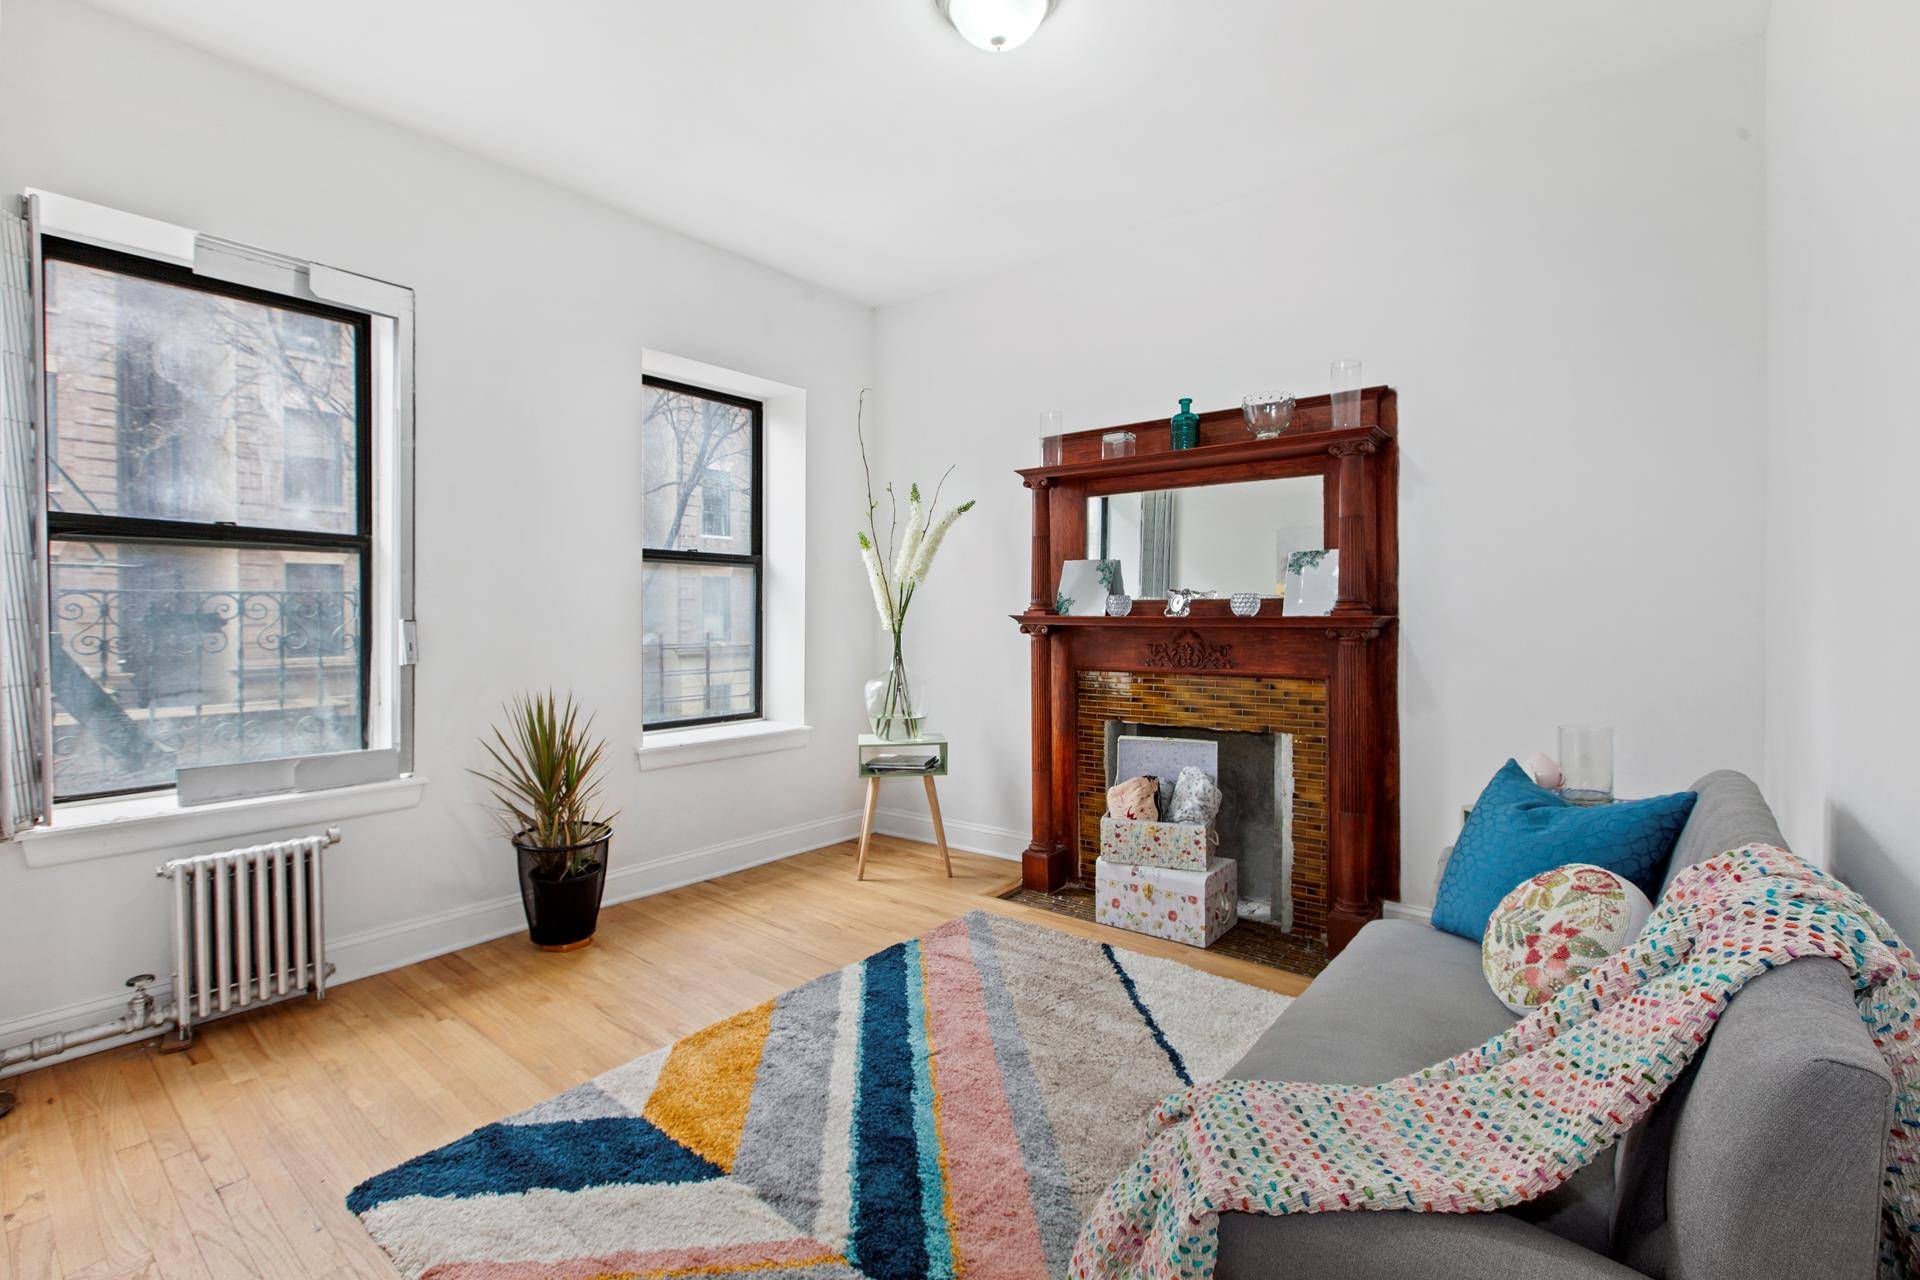 Close to Morningside park.